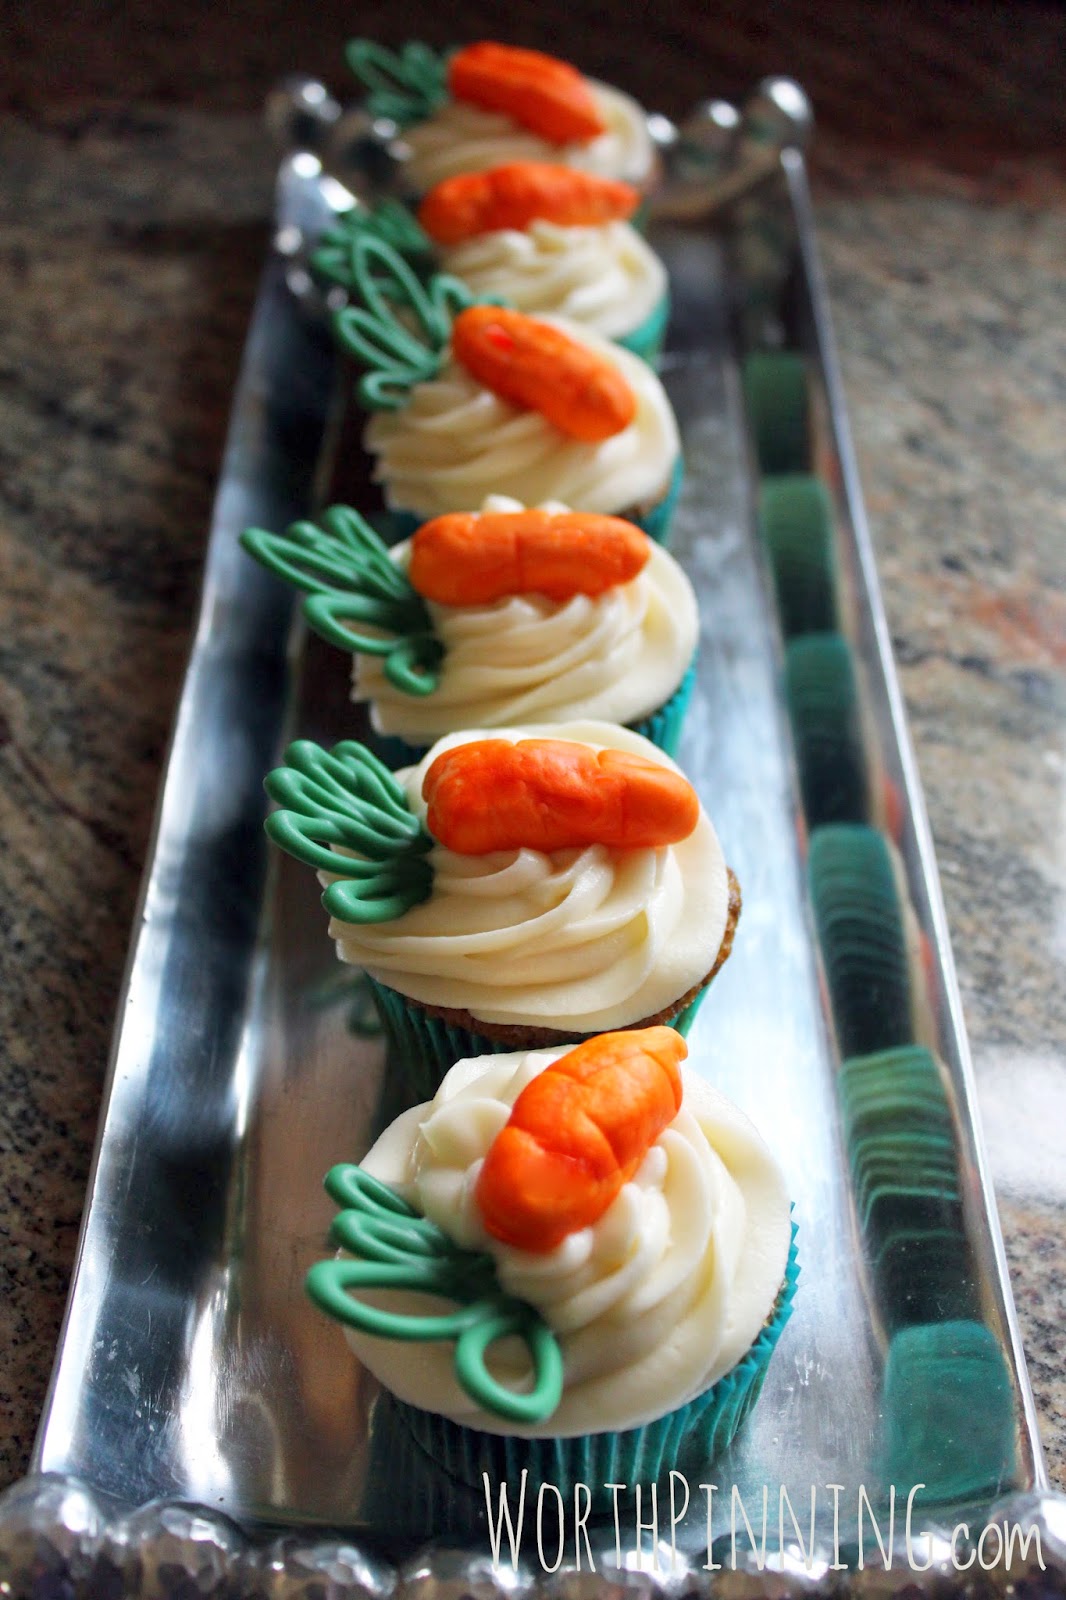 carrot cupcakes with carrot toppers